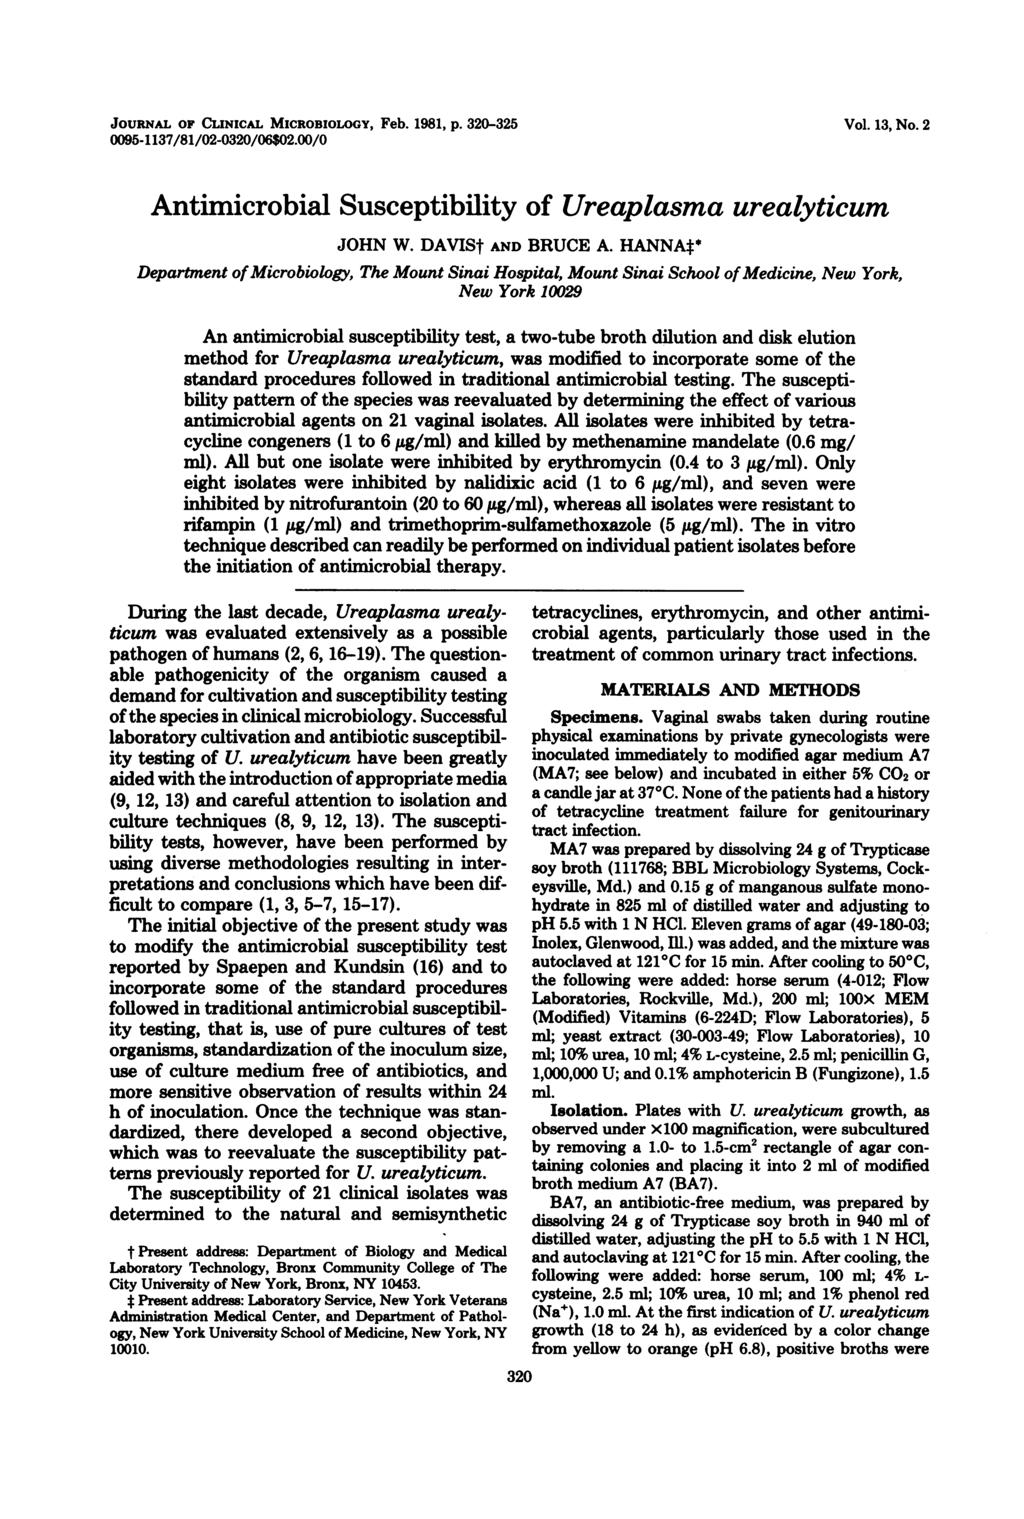 JOURNAL 0F CLINICAL MICROBIOLOGY, Feb. 1981, p. 320-325 0095-1137/81/02-0320/06$02.00/0 Vol. 13, No. 2 Antimicrobial Susceptibility of Ureaplasma urealyticum JOHN W. DAVISt AND BRUCE A.